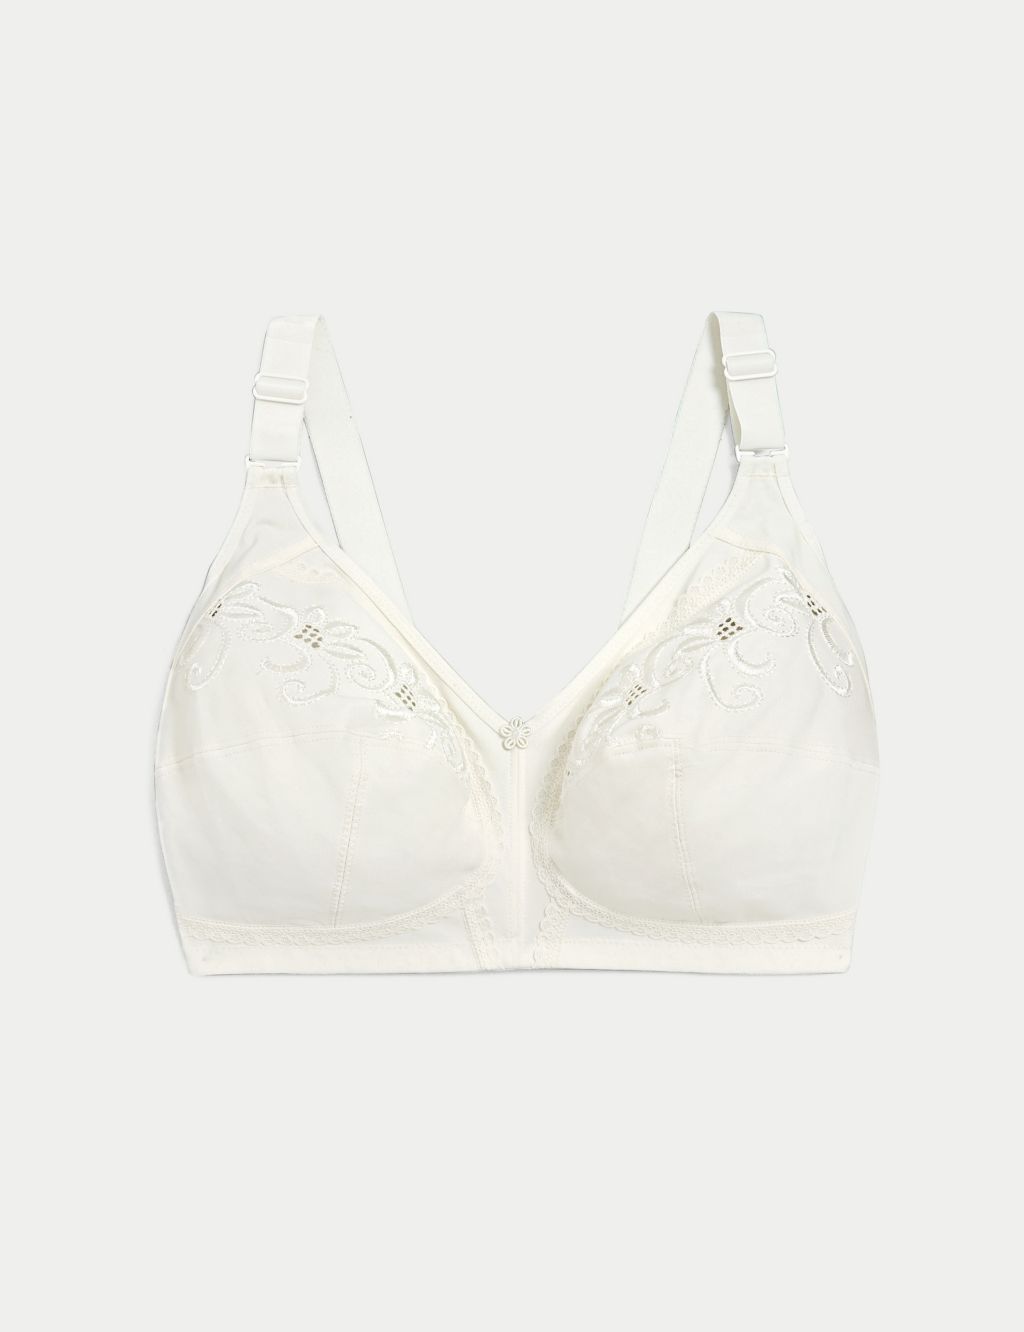 Total Support Embroidered Full Cup Bra B-H image 2